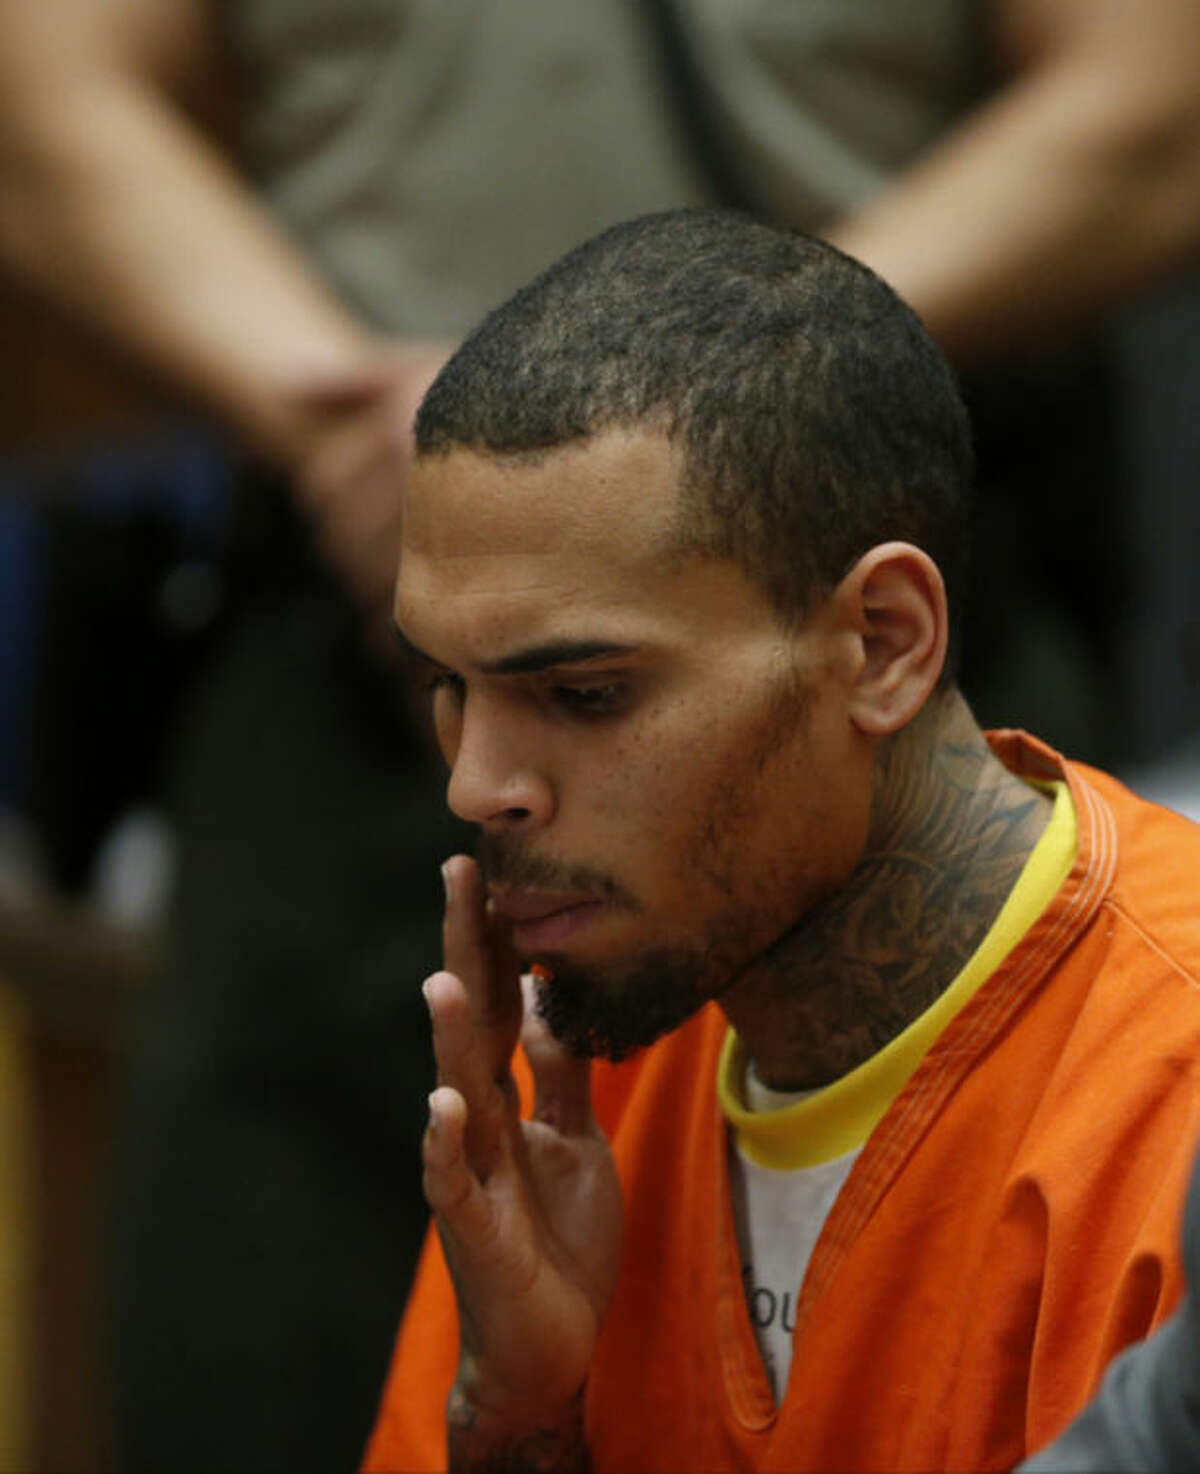 R&B singer Chris Brown appears in Los Angeles Superior Court with his attorney Mark Geragos, on Monday, March 17, 2014. Brown will spend another month in jail after a judge said Monday he was told the singer made troubling comments in rehab about being good at using guns and knives. The singer was arrested on Friday, March 14, 2014, after he was dismissed from a Malibu facility where he was receiving treatment for anger management, substance abuse and issues related to bipolar disorder. (AP Photo/Lucy Nicholson, Pool)